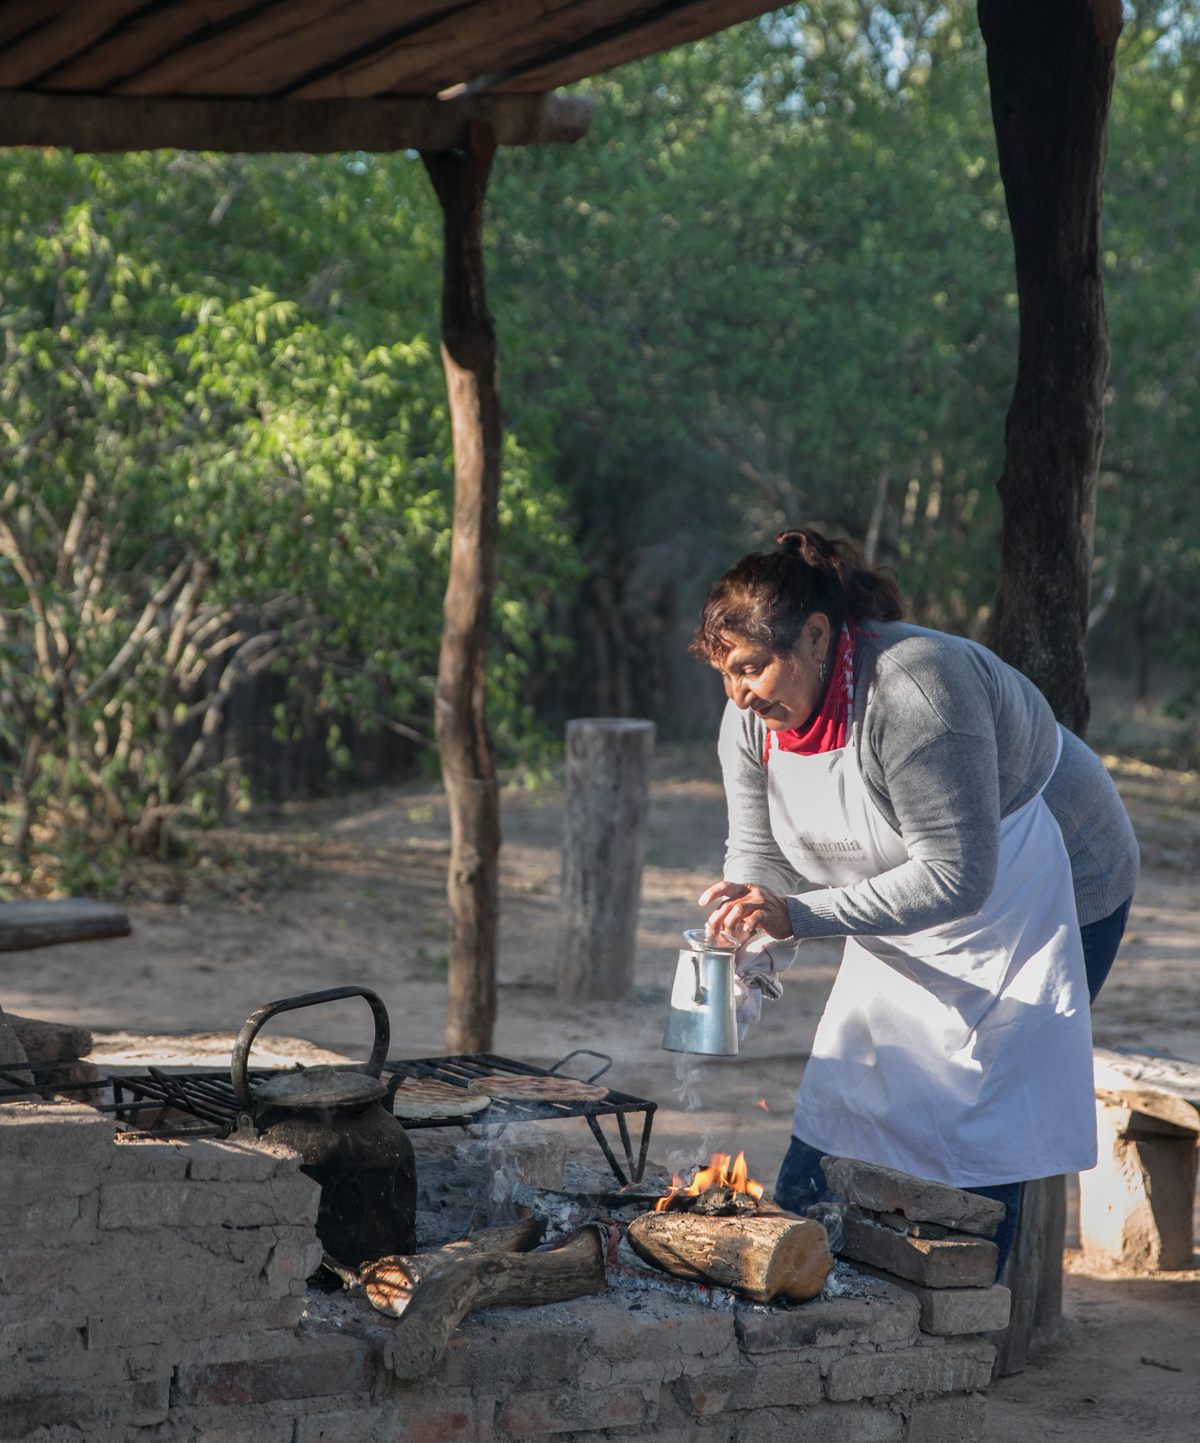 Zulma Argañaraz, who lives in a small village within the park’s borders, opened a restaurant to cater to visitors.